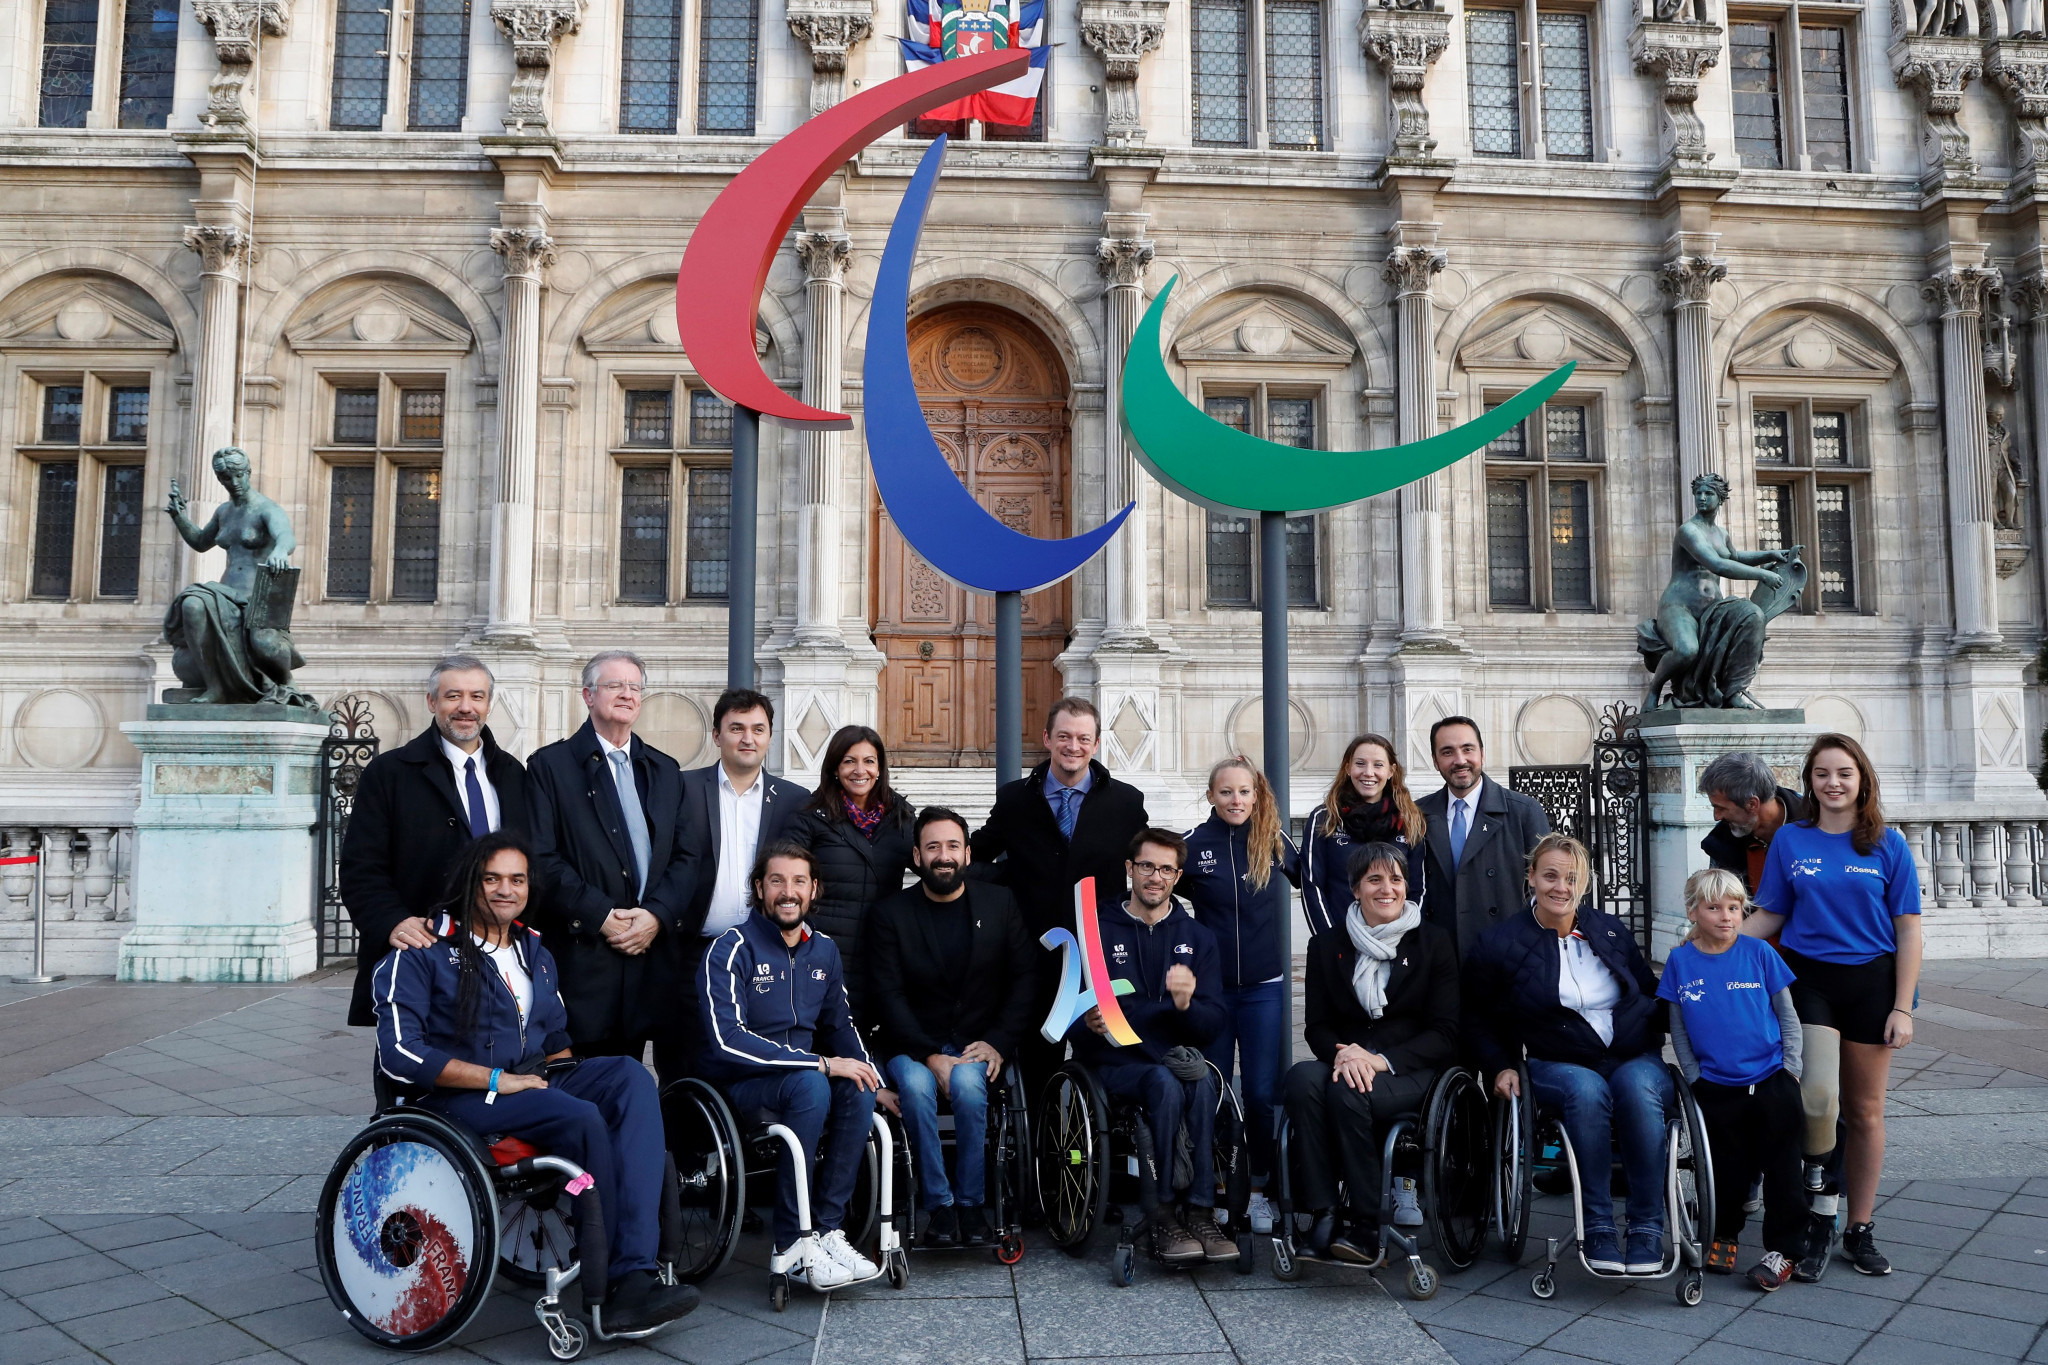 IPC to announce sports and disciplines through to next stage of Paris 2024 process